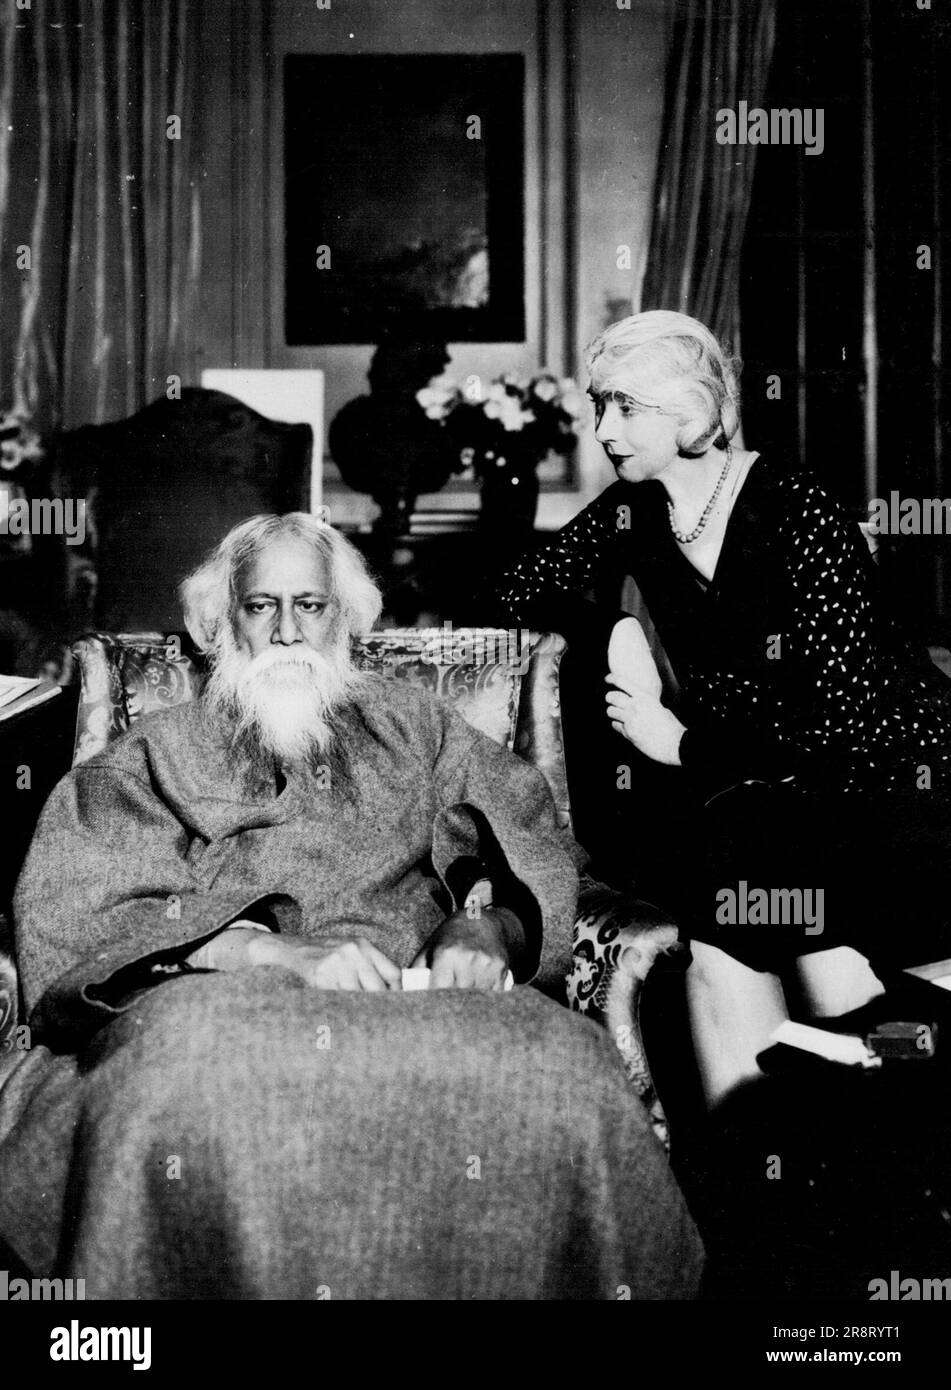 When East Meets West -- Rabindranath Tagore, famed Hindu Philosopher and Poet, with Ruth St. Denis, renowned interpreter of oriental dances. The pair will appear in a joint recital of poems and dances Sunday, December 14th, for the benefit of the International University which is to be Tagore's monument. October 12, 1930. (Photo by International Newsreel Photo). Stock Photo